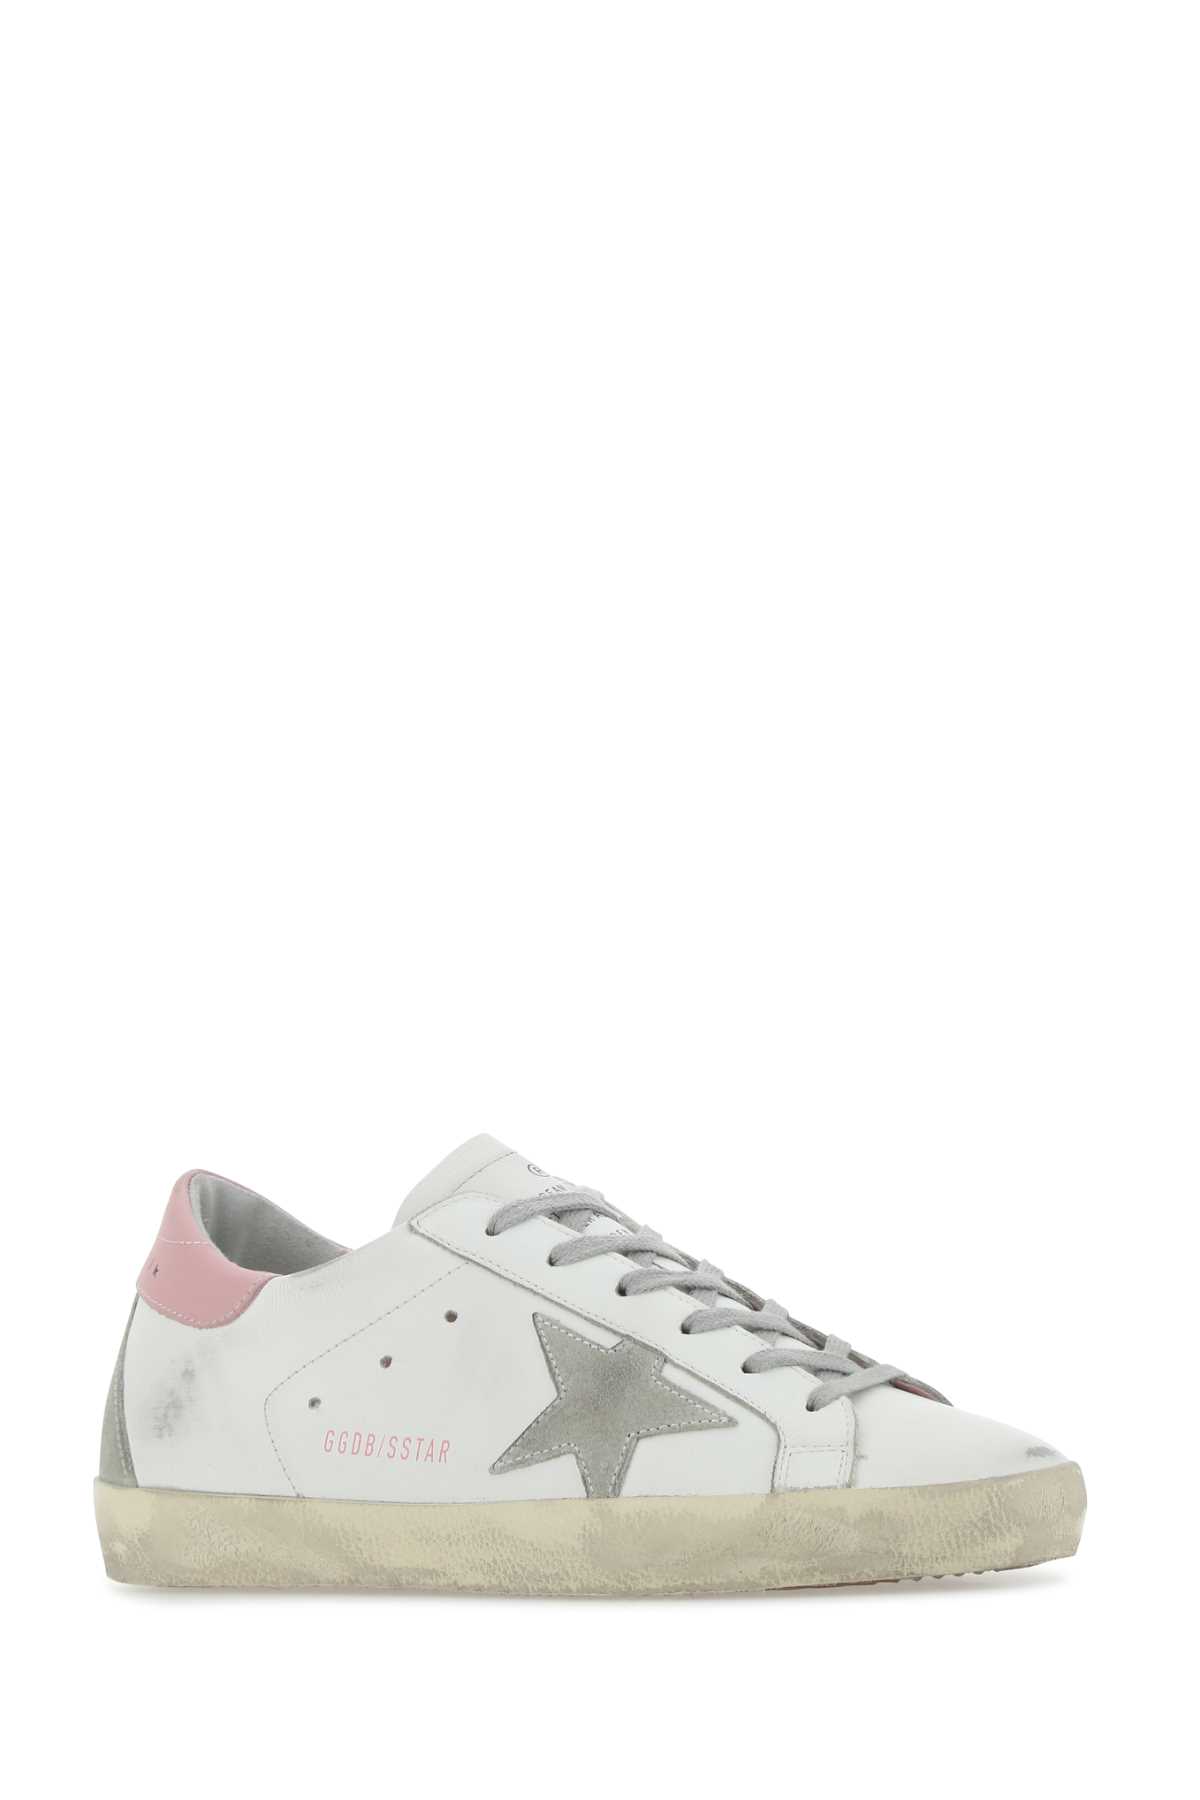 GOLDEN GOOSE MULTICOLOR LEATHER SUPER STAR CLASSIC SNEAKERS